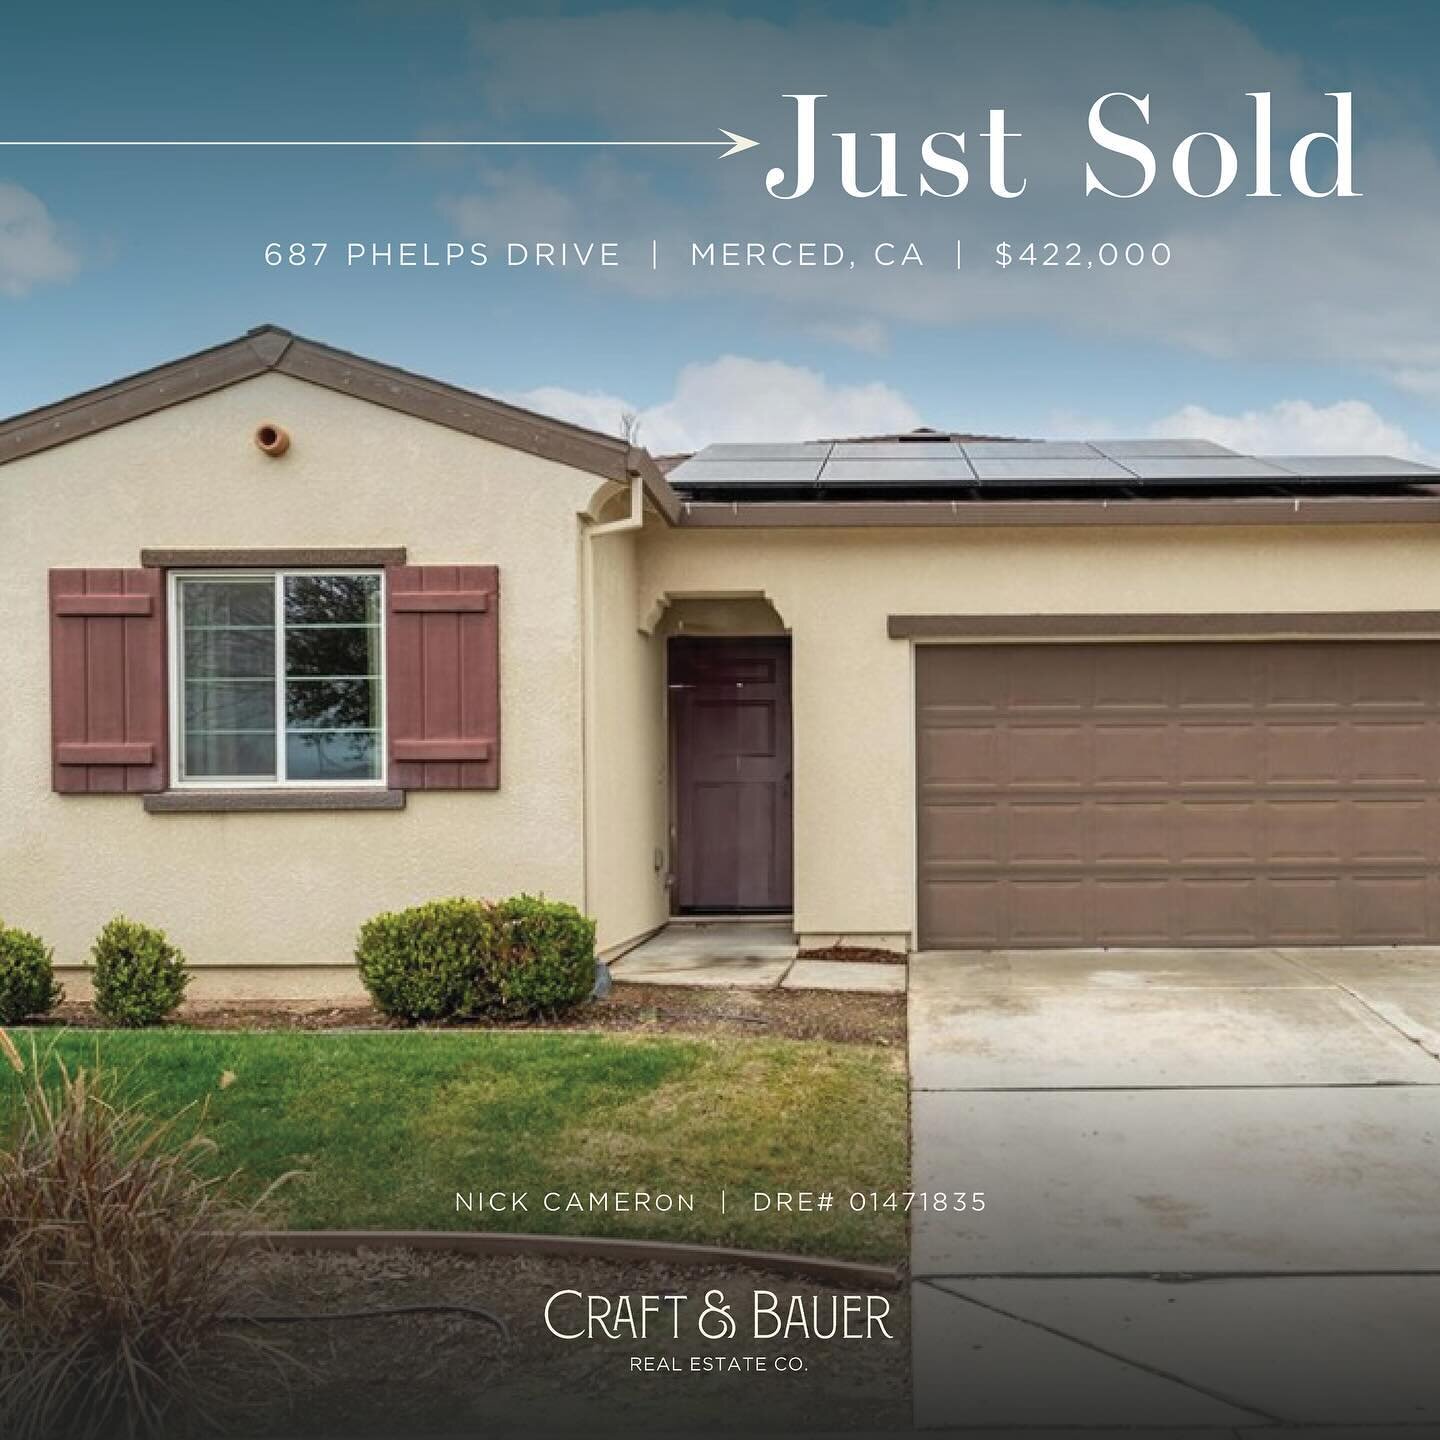 JUST SOLD 👏 Congratulations to the new owners of this beautiful 4-bedroom home! ⁠
⁠
🏡 687 Phelps Drive⁠
📍 Merced, CA⁠
💰 $422,000⁠
⁠
This adorable home is located conveniently in Merced close to shopping, restaurants, parks and the college/univers